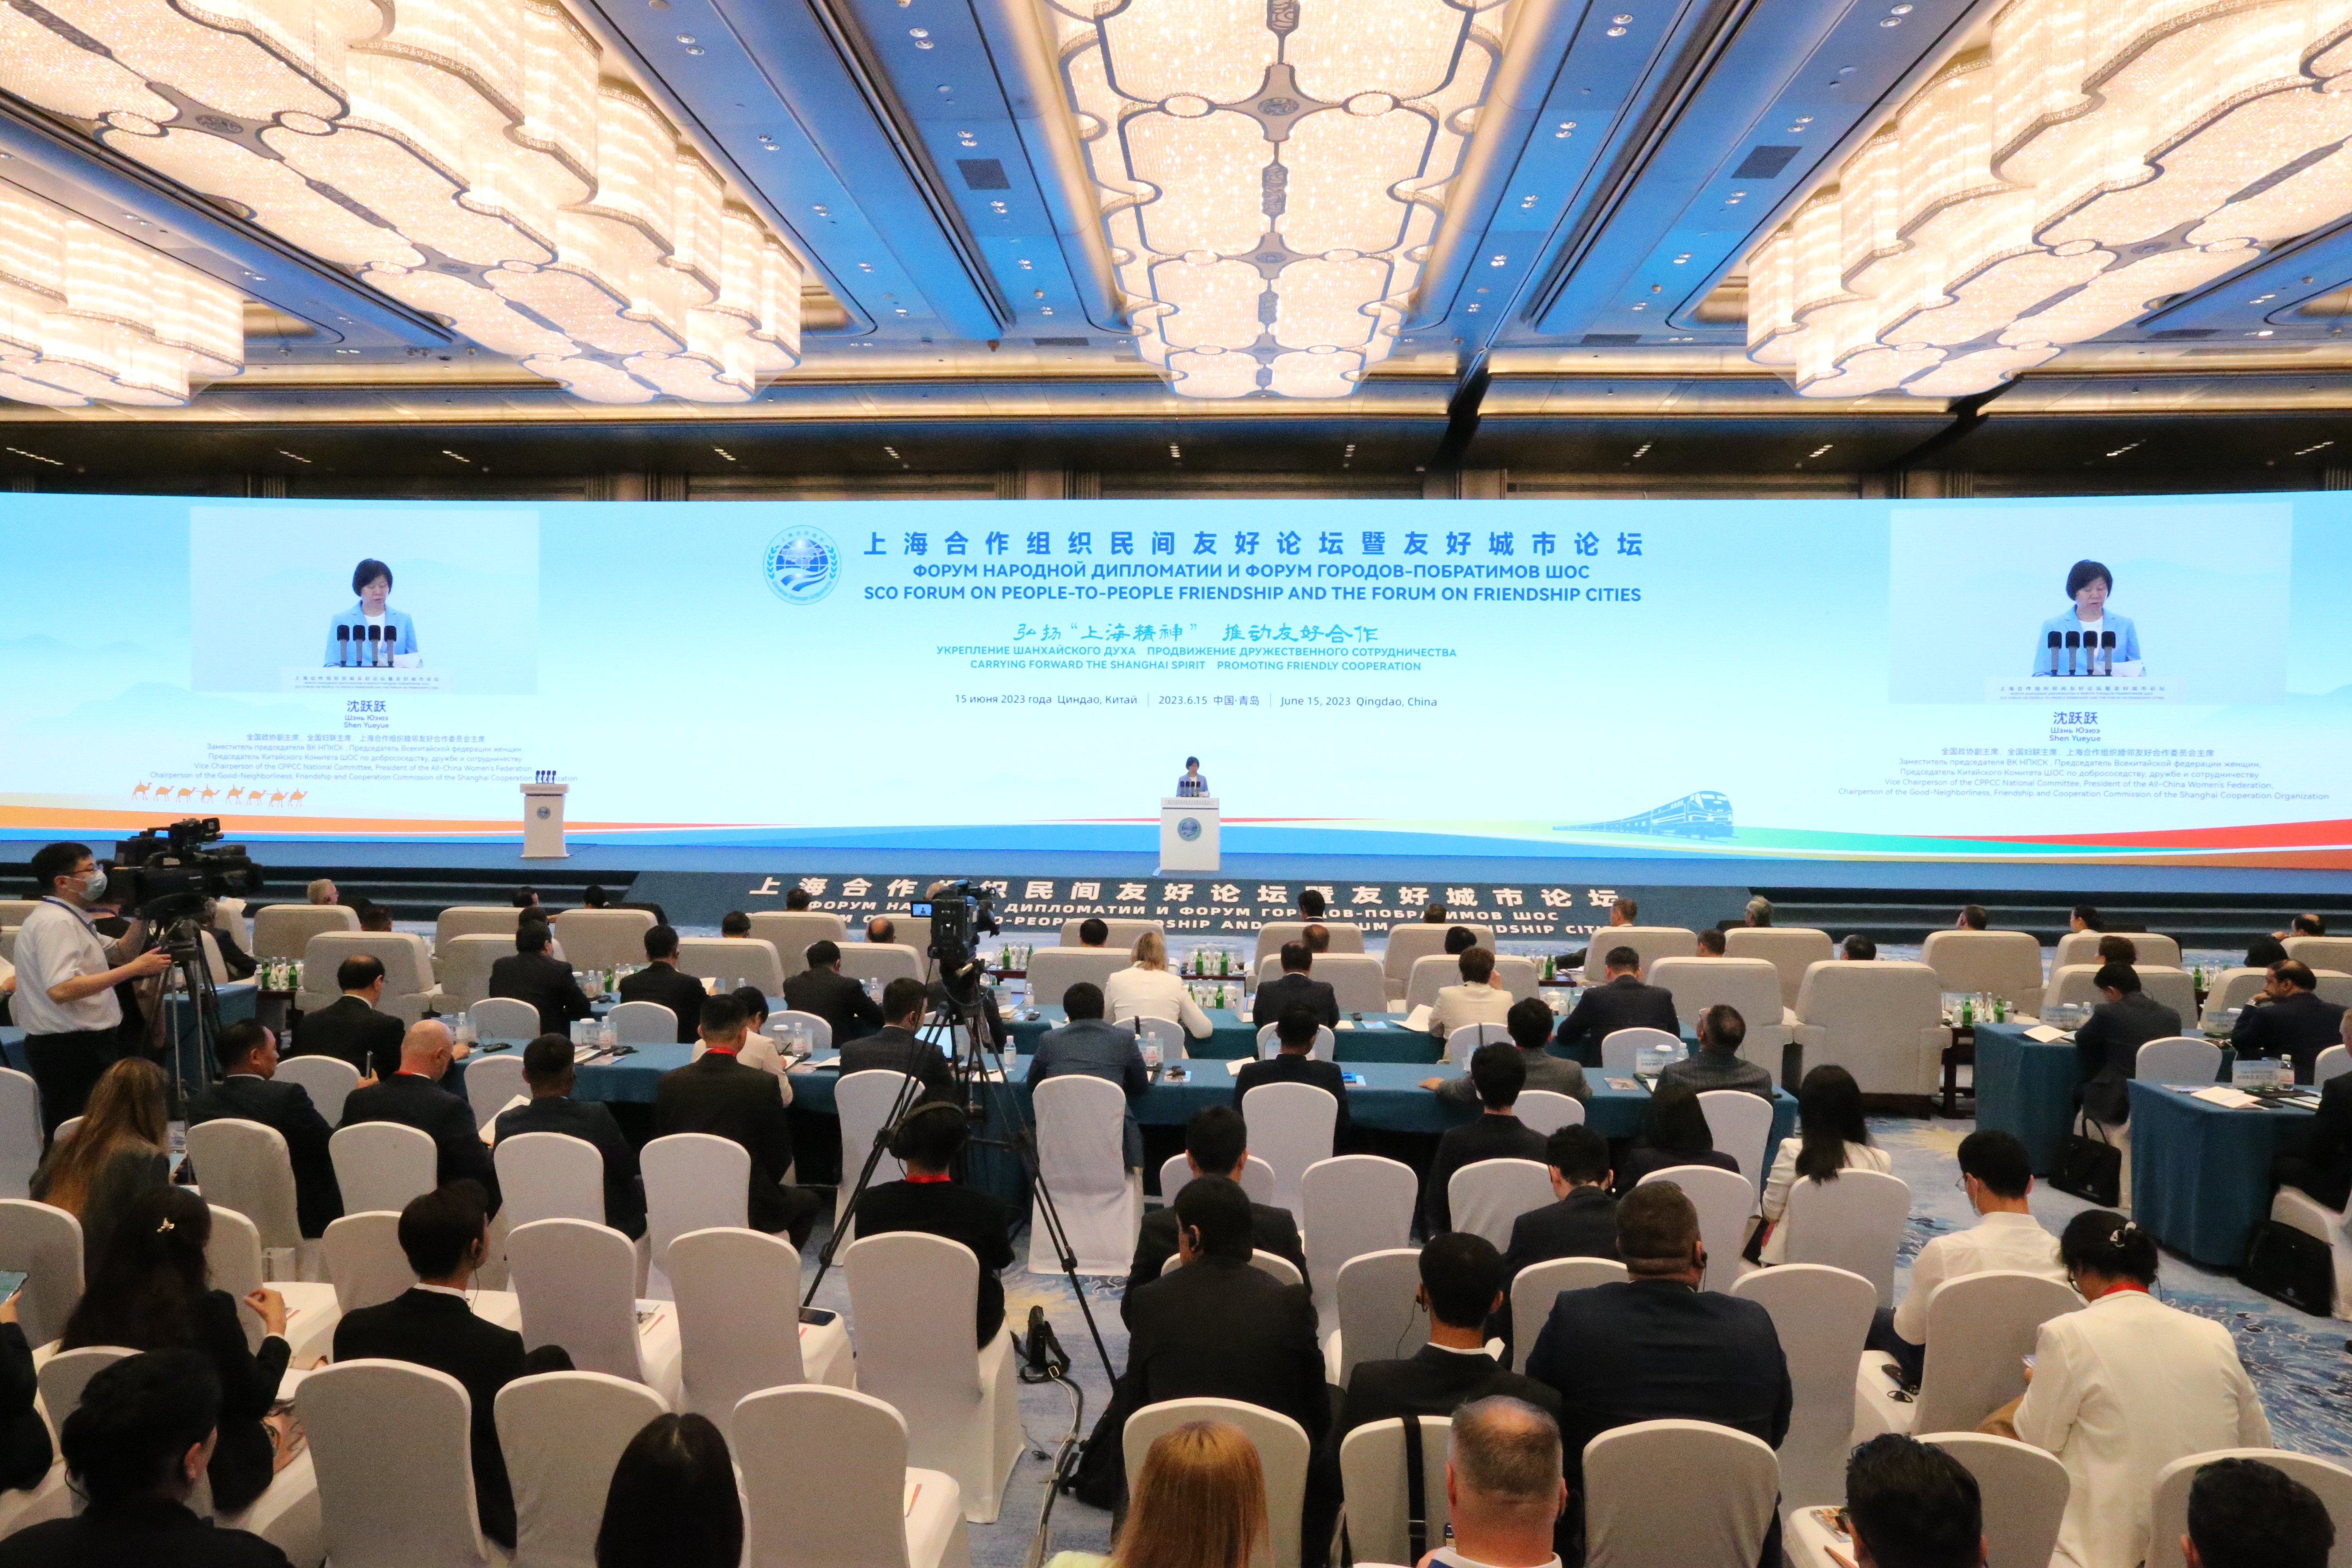 SCO Forum on People-to-People Friendship and the Forum on Friendship Cities kicks off in Qingdao